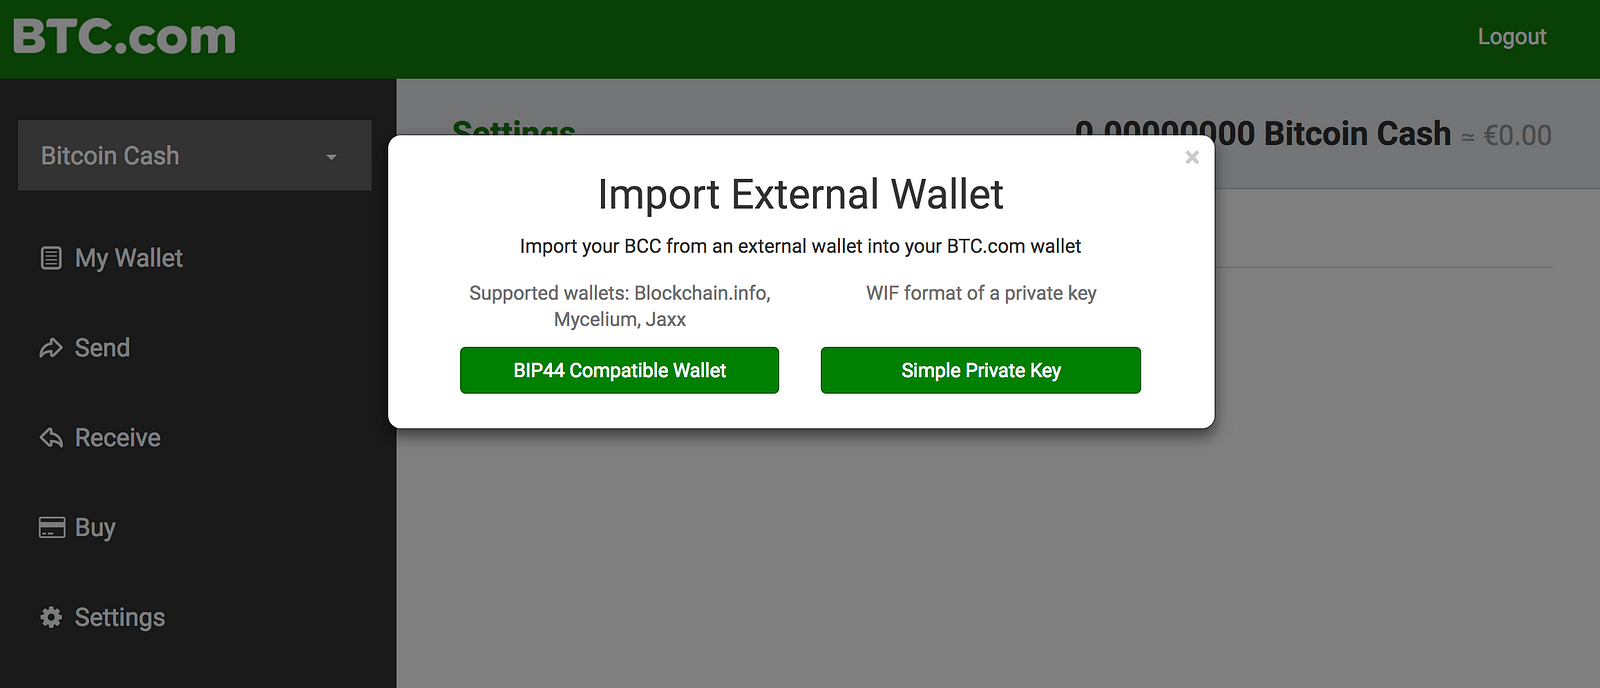 Bitcoin Cash How To Buy Private Key Export Bitcoin Lord Of The War - 